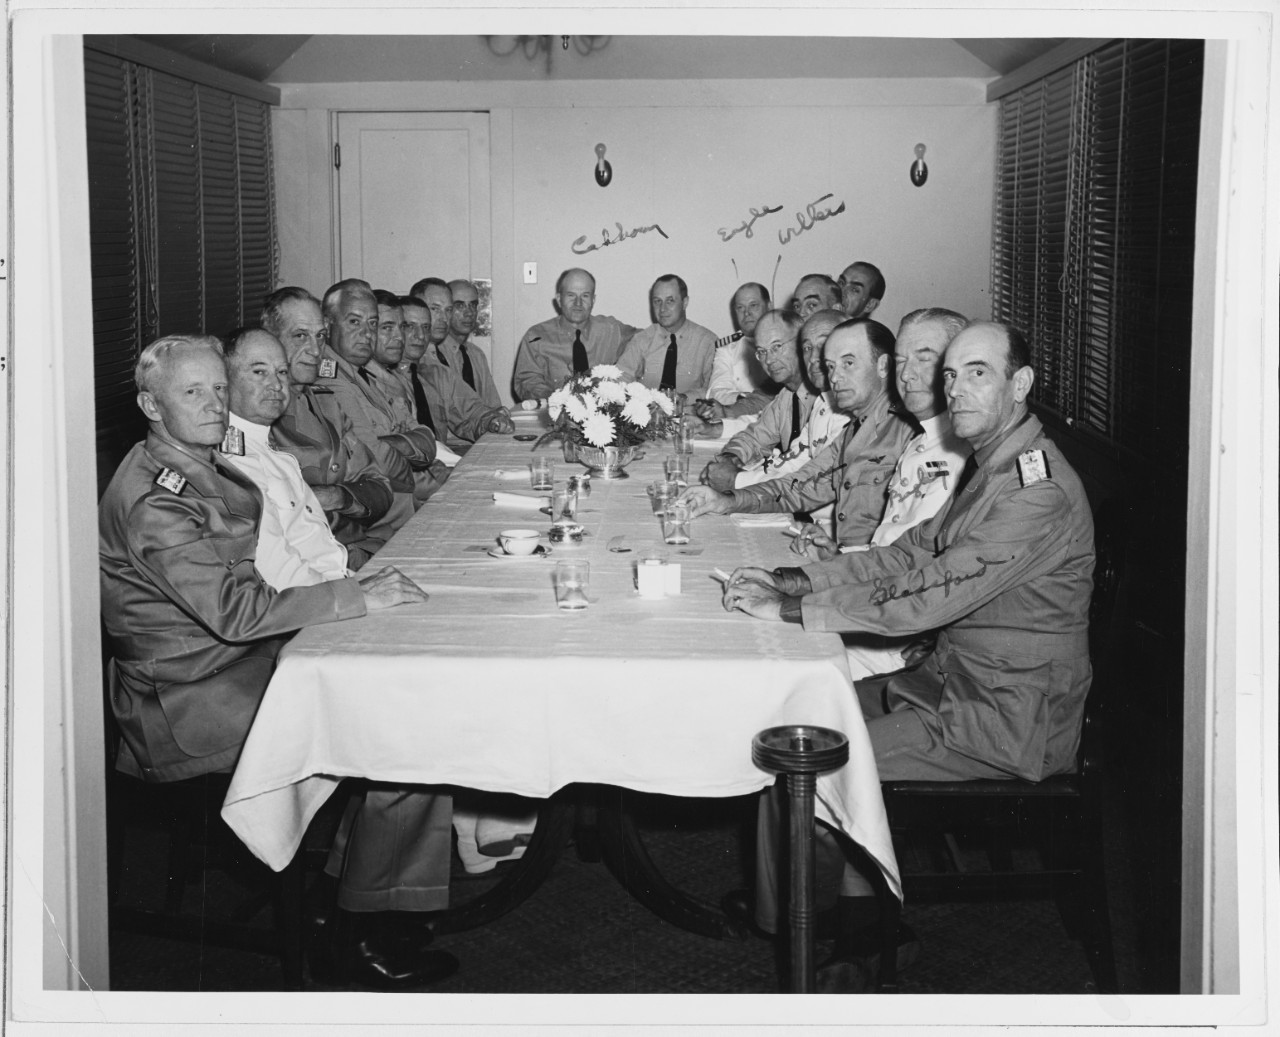 Admiral Chester W. Nimitz, Commander-in-Chief Pacific, Holds a Meeting with his Staff Officers